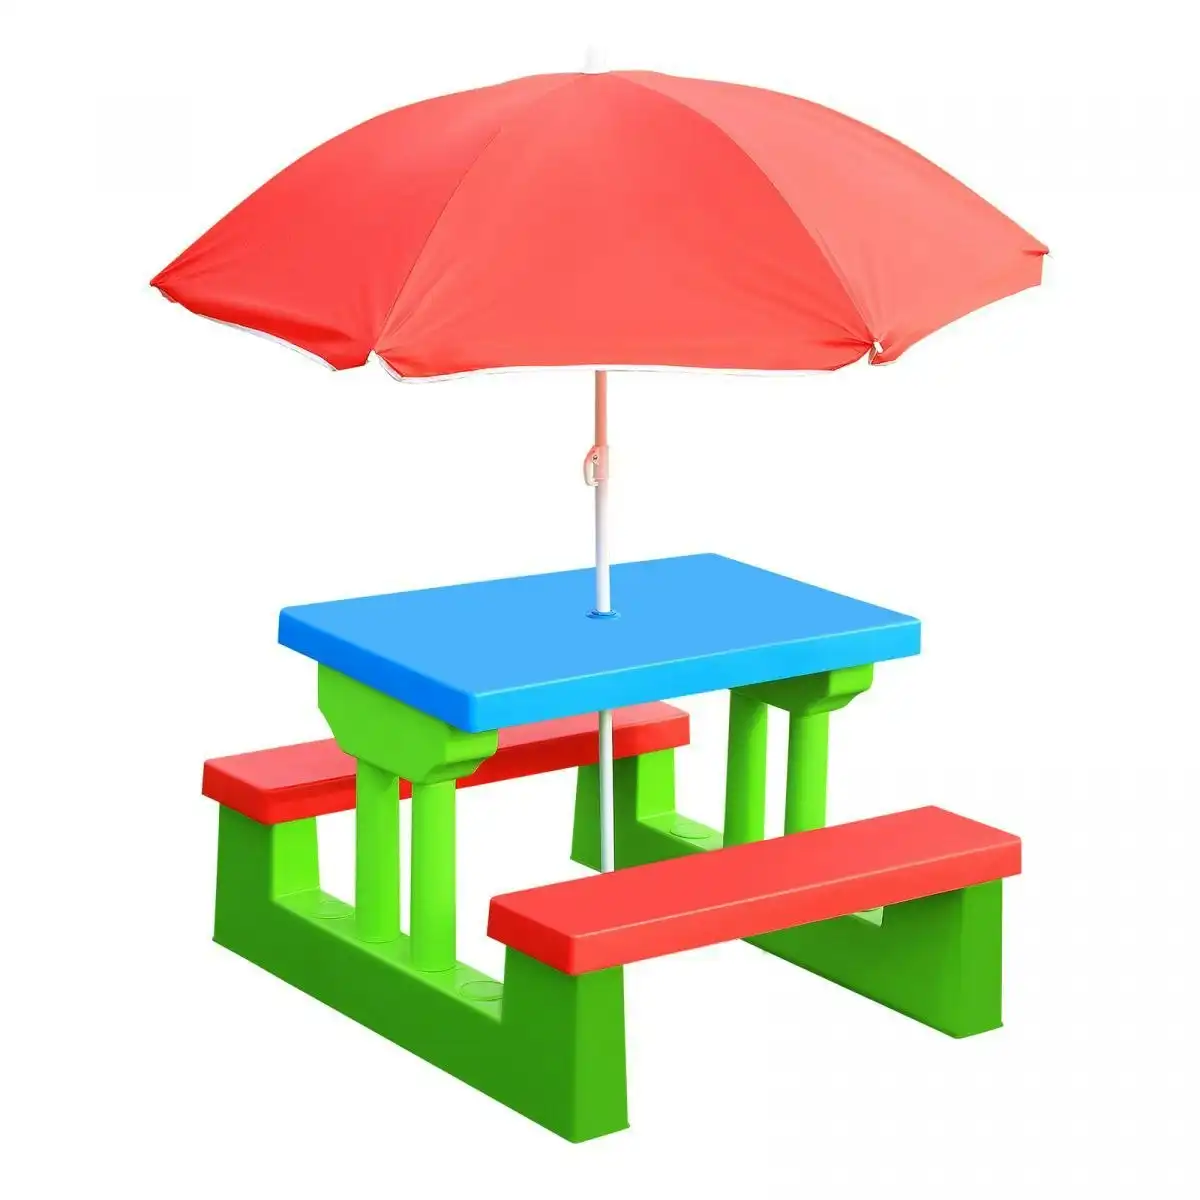 Ausway Outdoor Garden Kids Children Picnic Table Set Play Toy with Umbrella